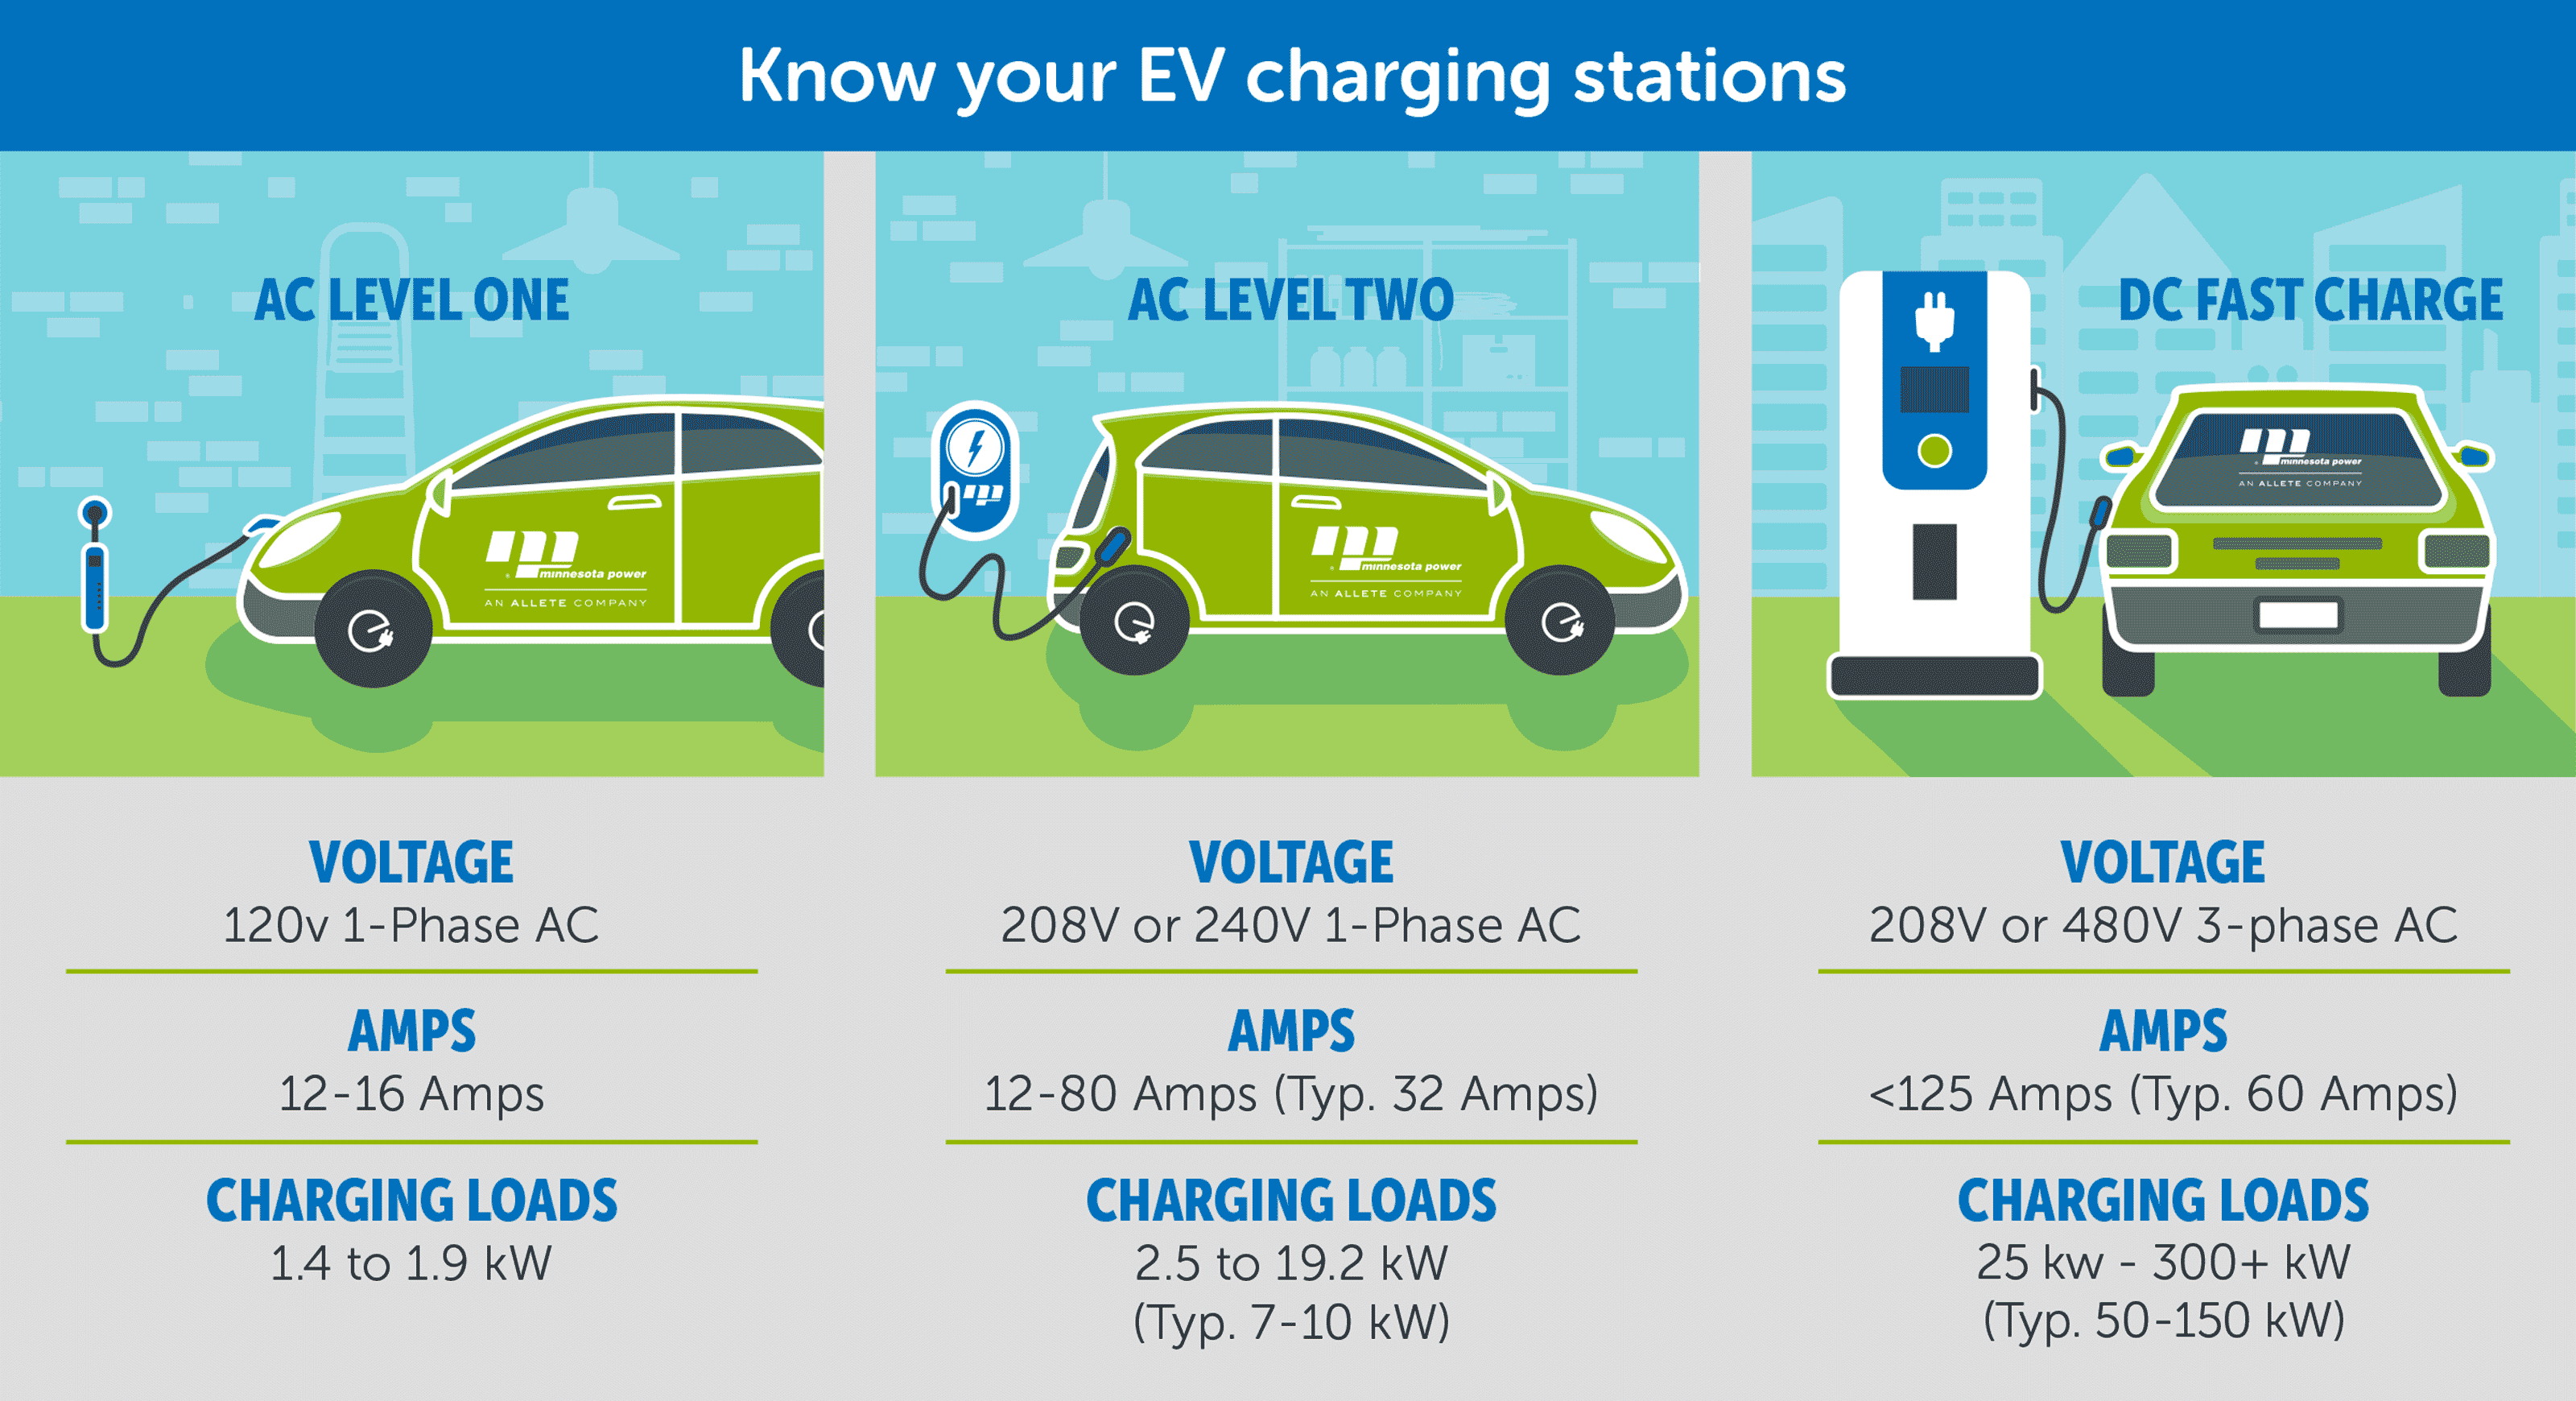 Know your EV charging stations